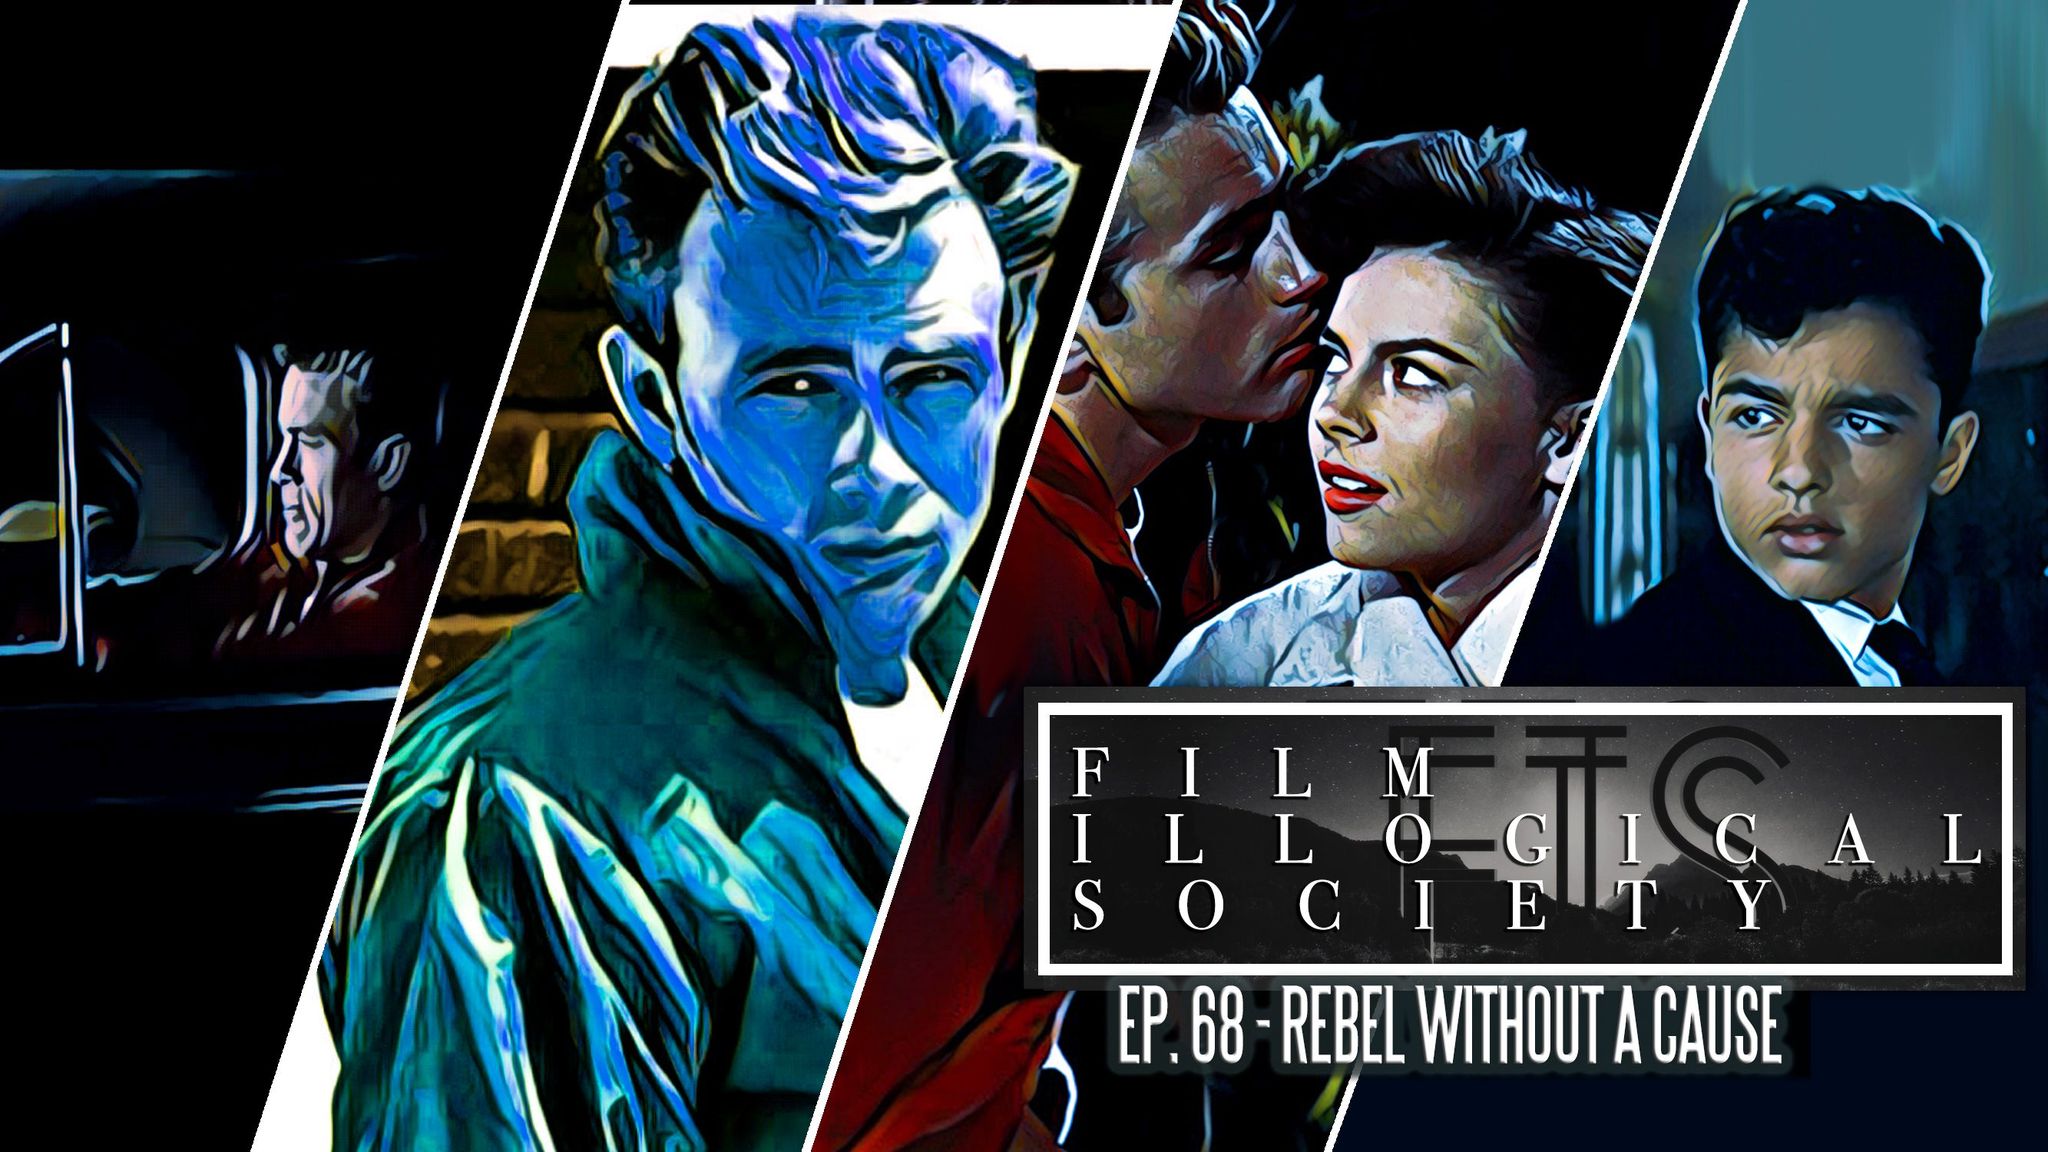 68 – Rebel Without a Cause